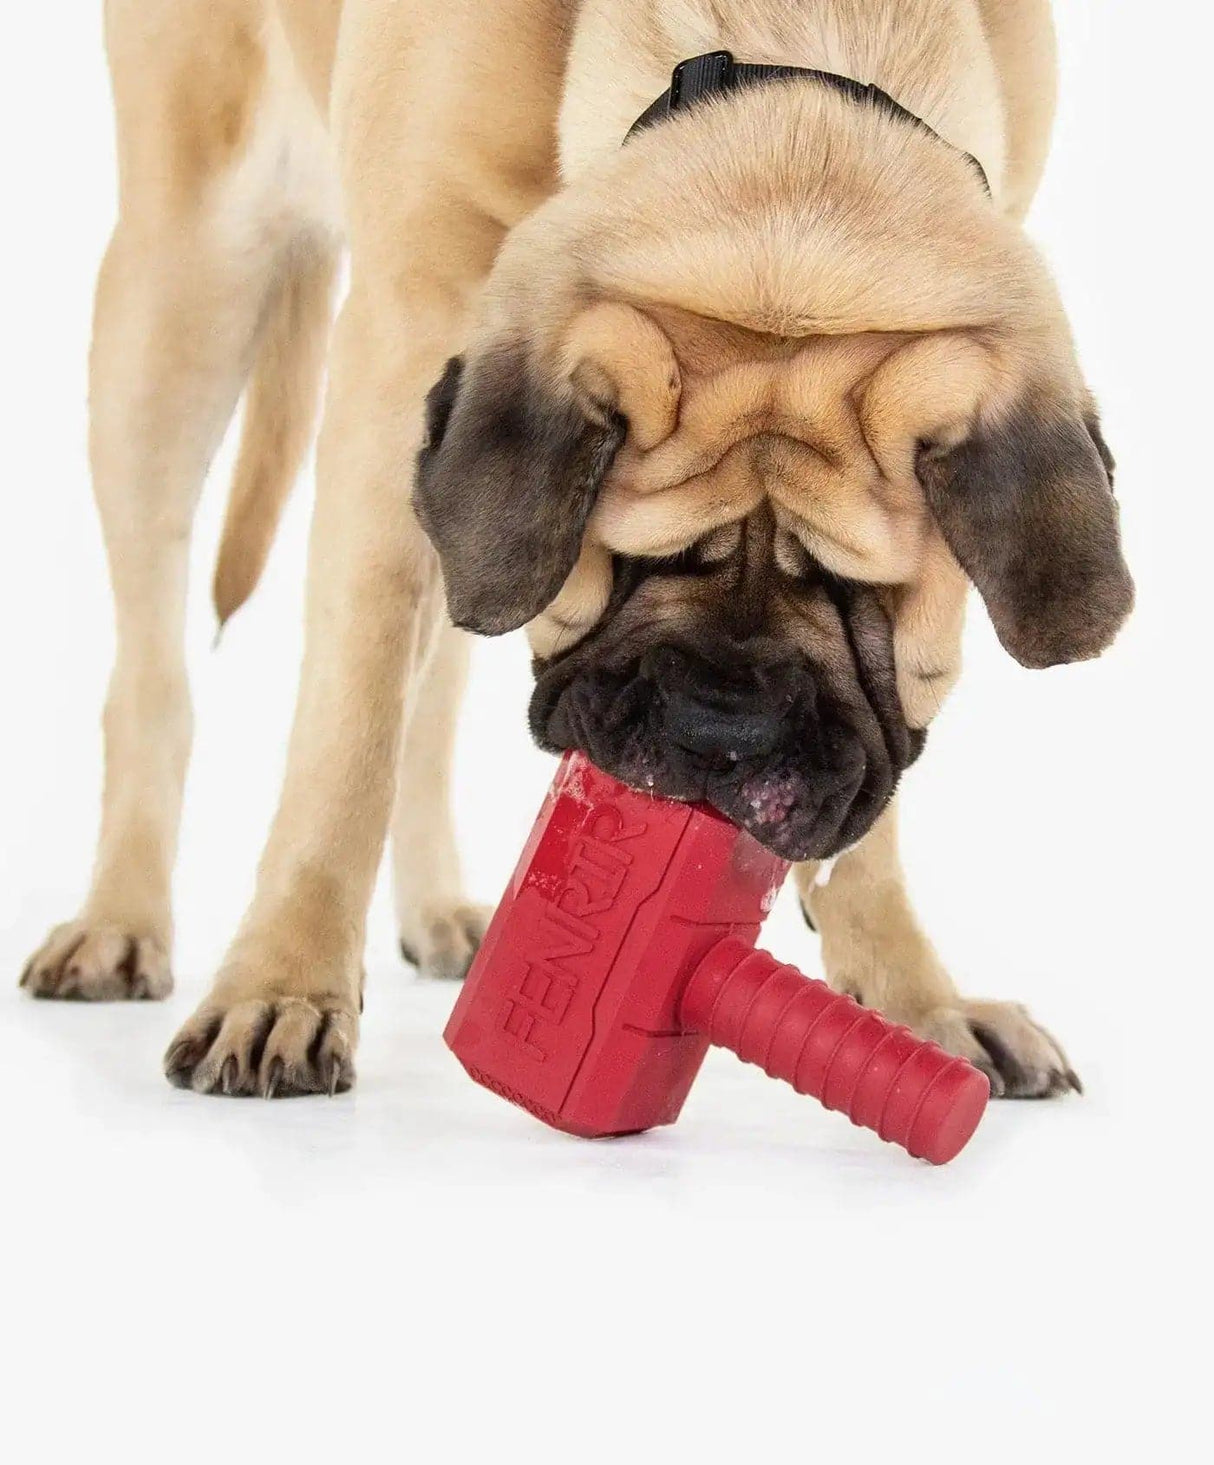 Importance and types of dog toys for mental stimulation